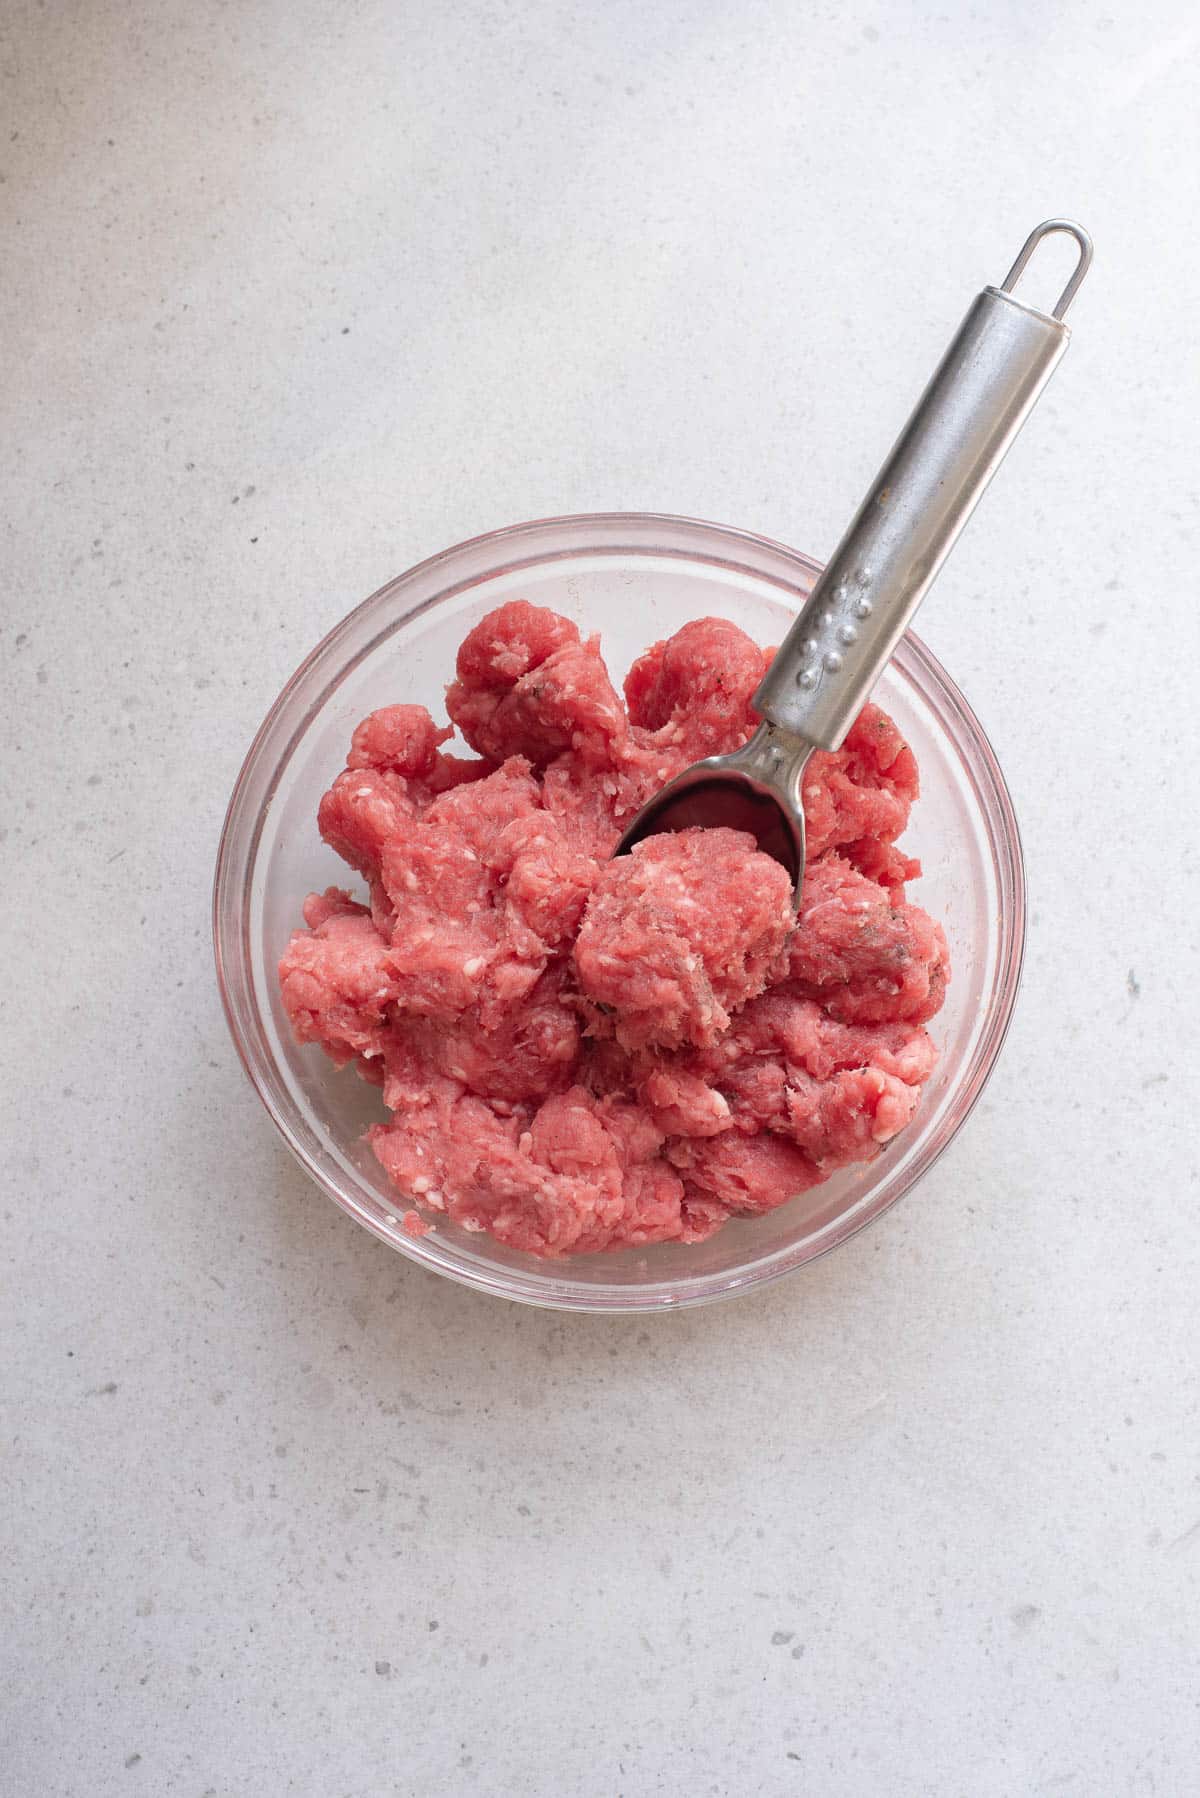 Raw ground beef meatballs in a glass bowl with scoop.